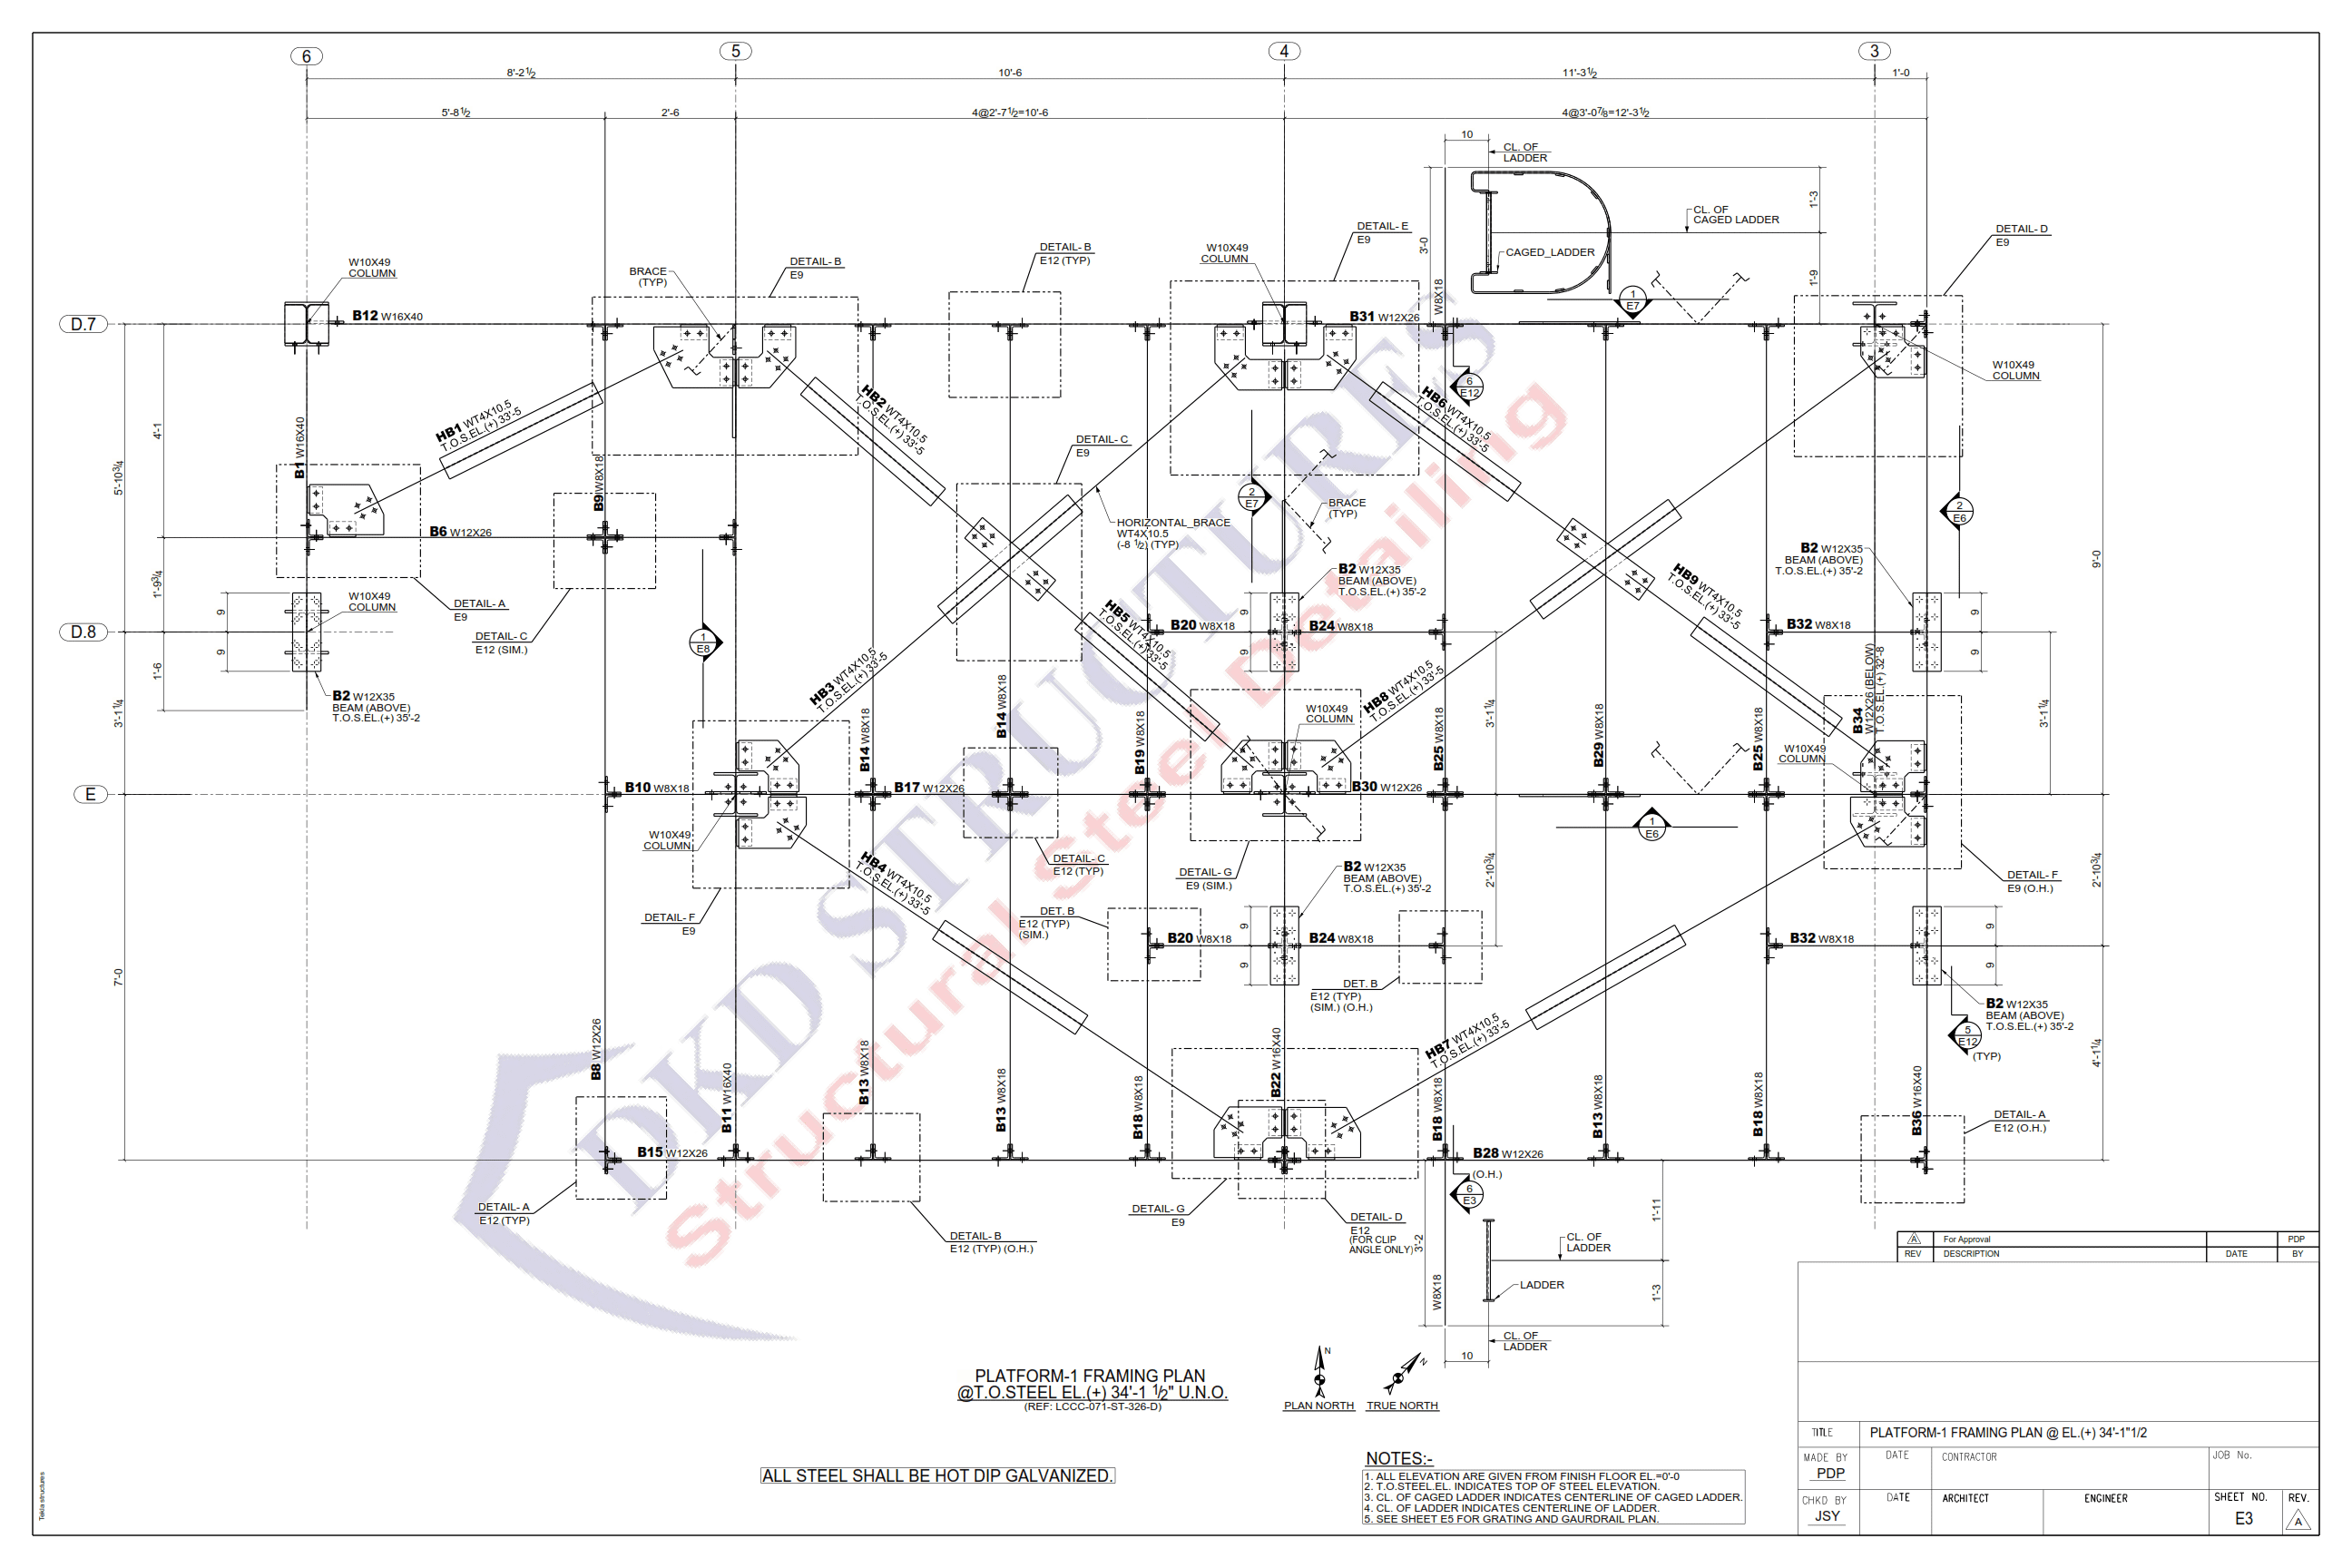 3=Industrial Building Erection Drawings_004